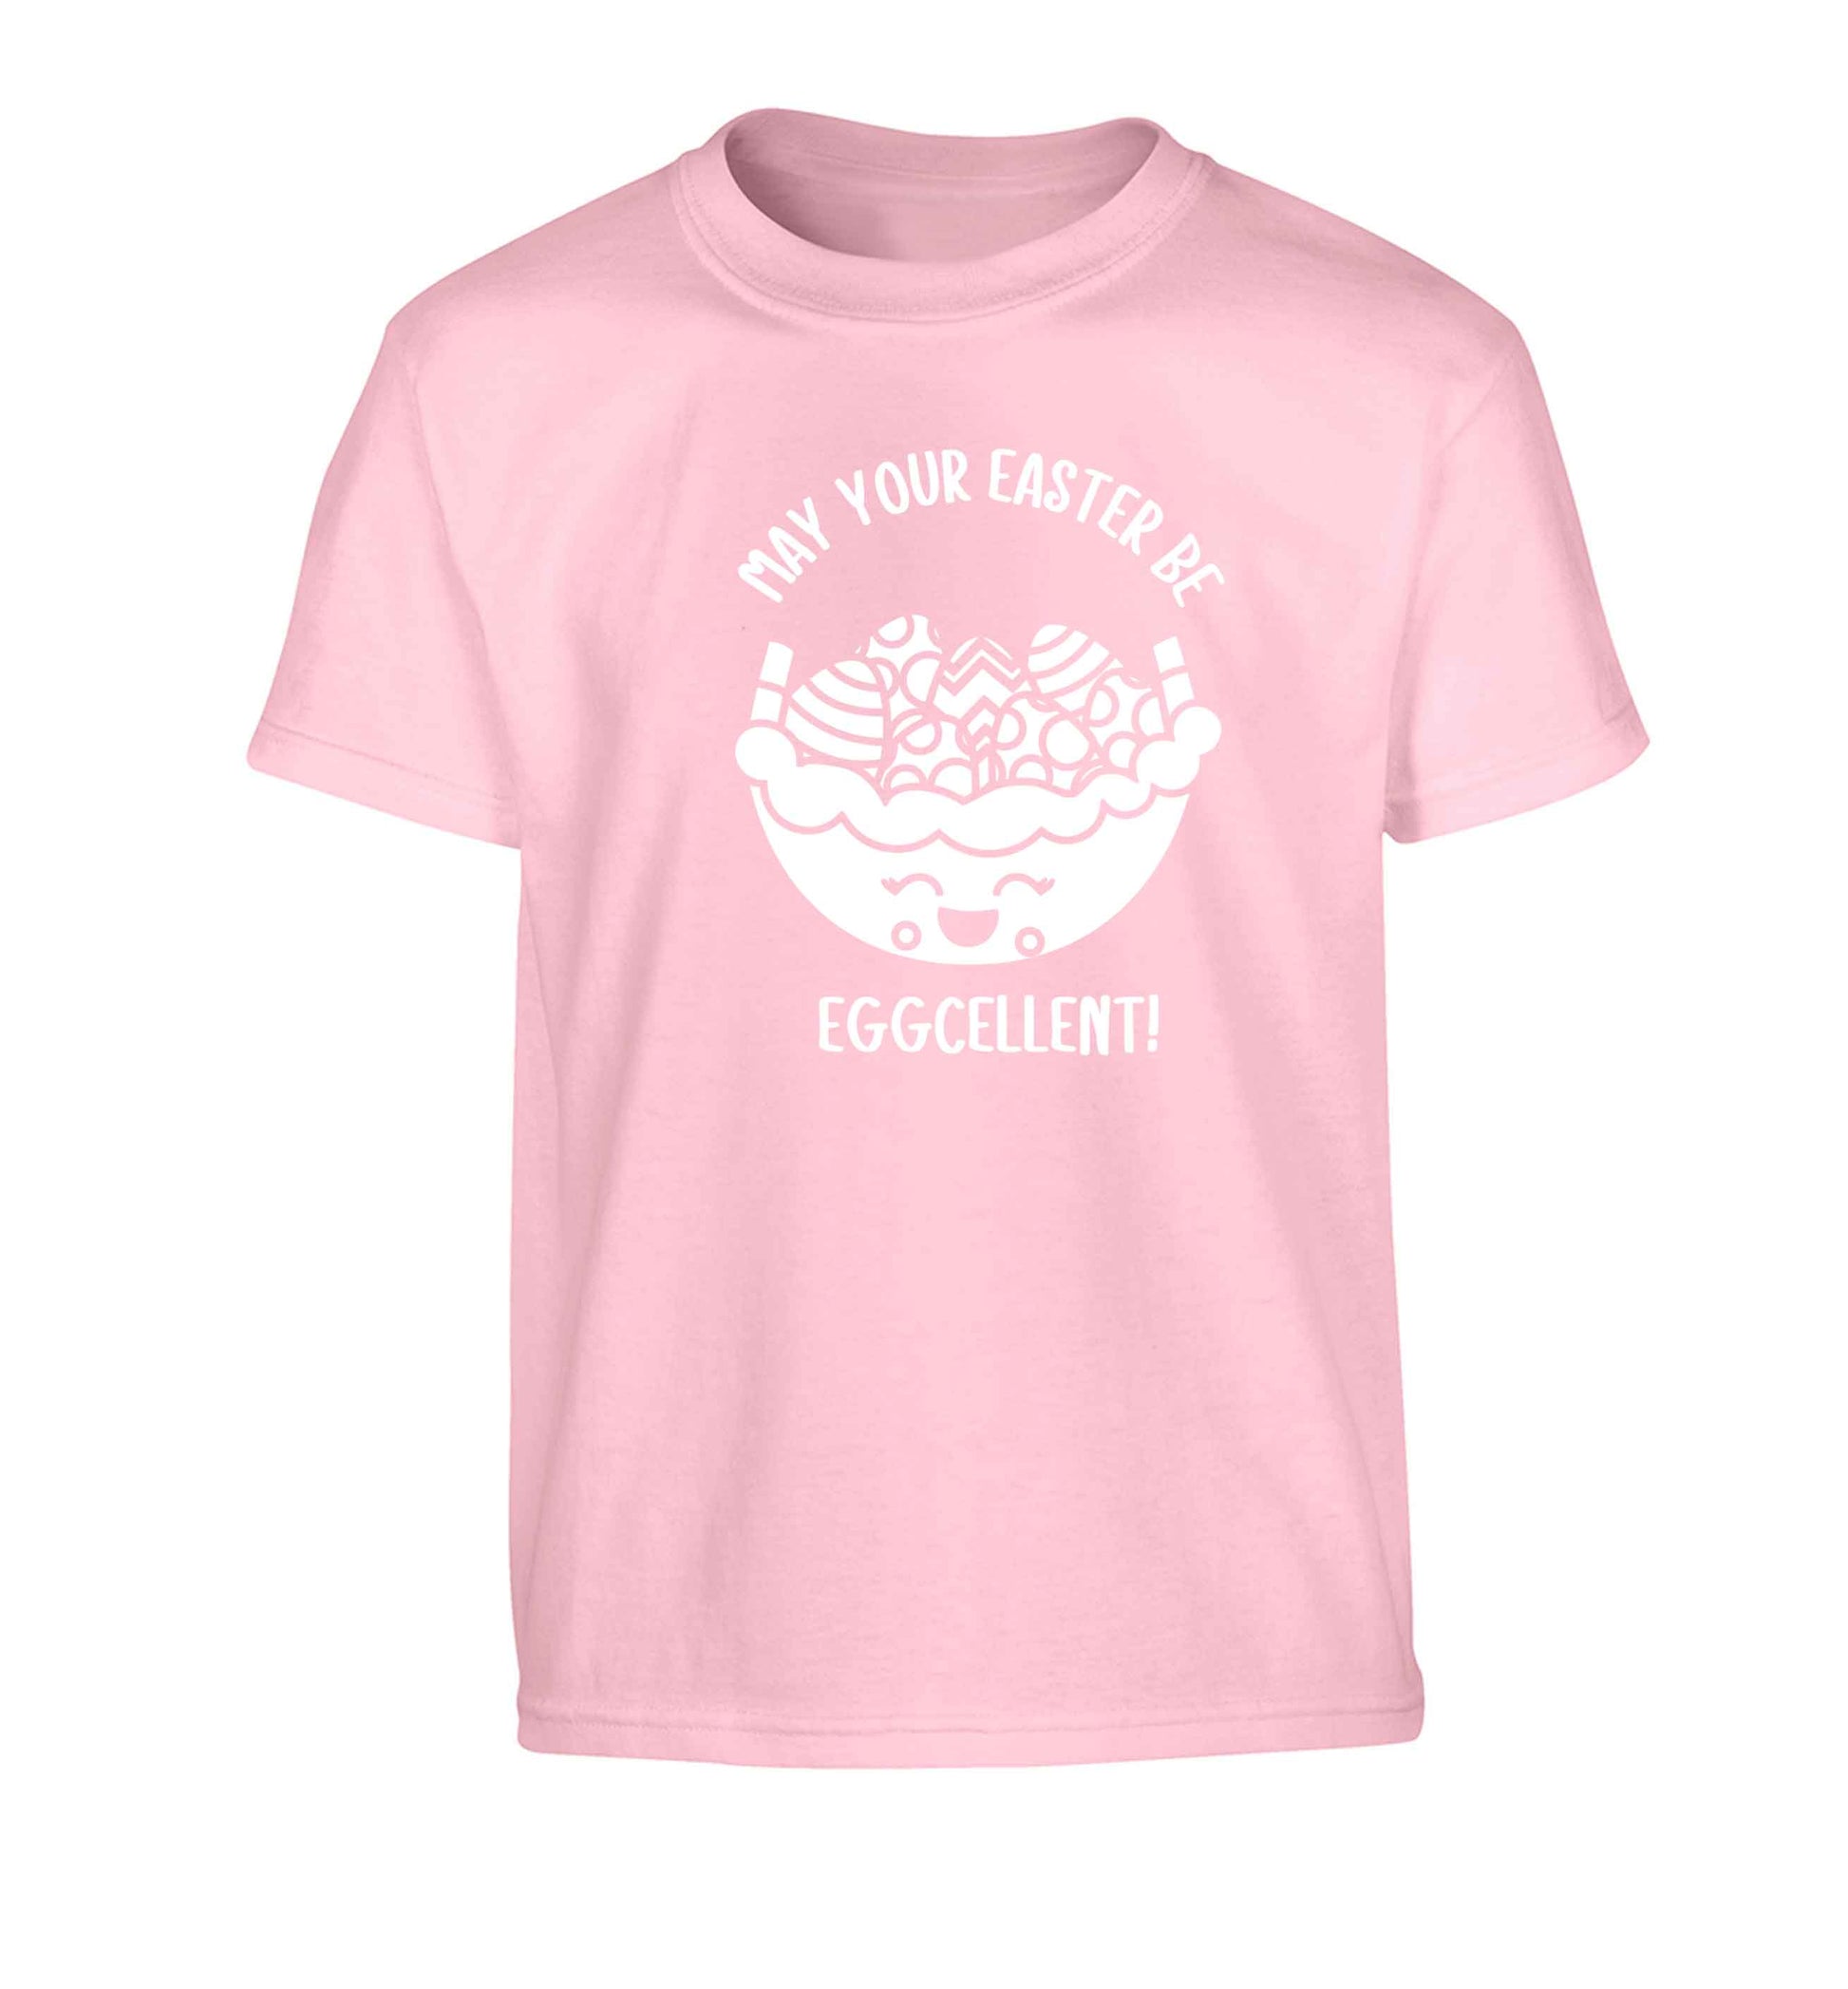 May your Easter be eggcellent Children's light pink Tshirt 12-13 Years